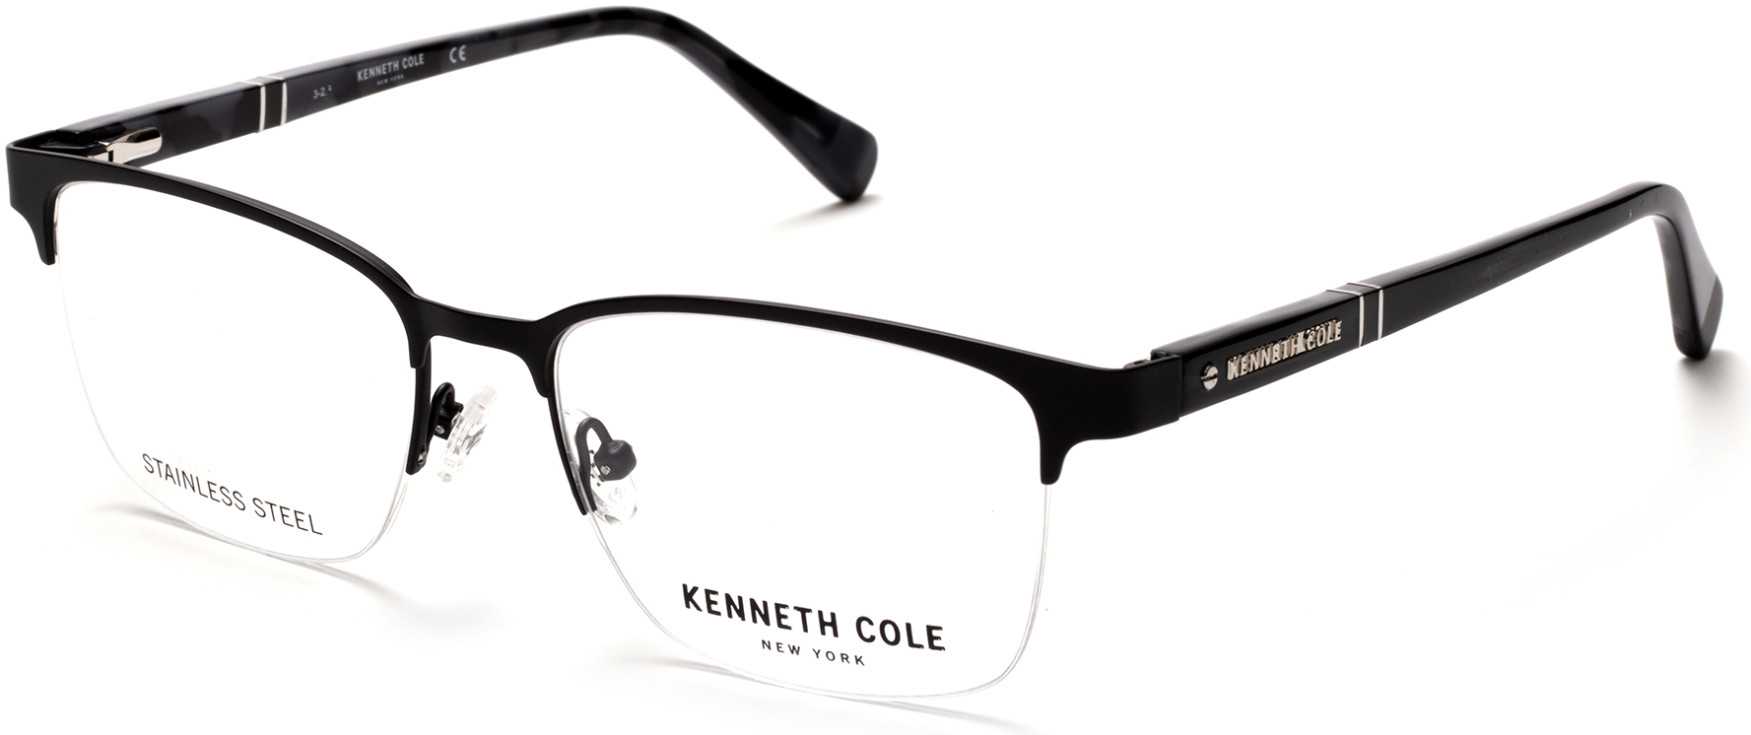 KENNETH COLE NY 0291